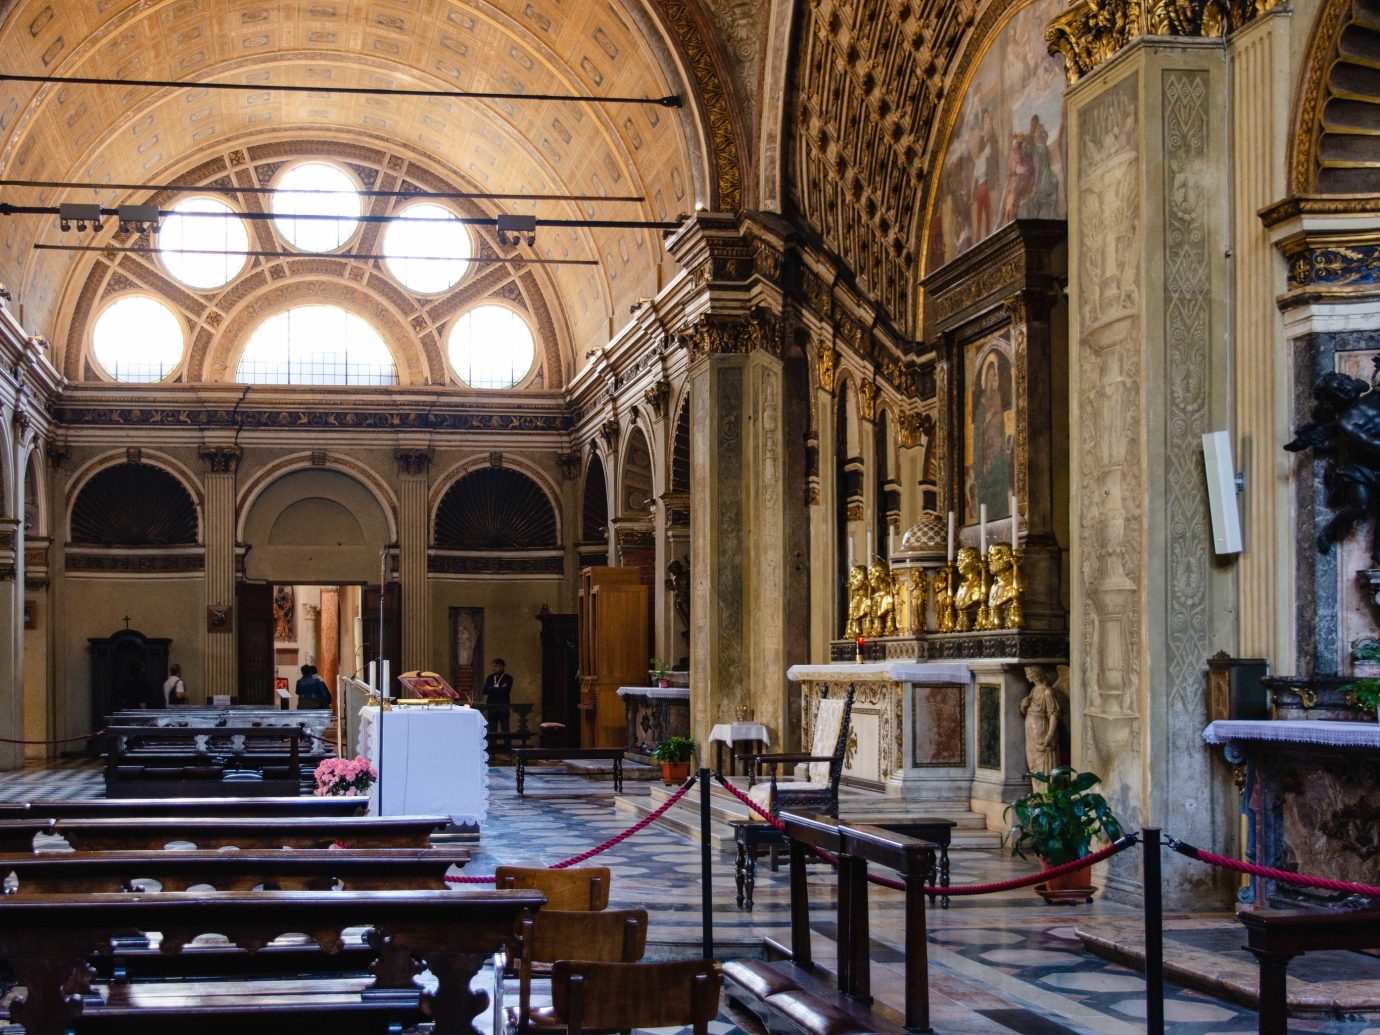 Arts + Culture Italy Milan indoor place of worship chapel building Church interior design cathedral basilica window abbey religious institute worship byzantine architecture arcade medieval architecture Lobby altar